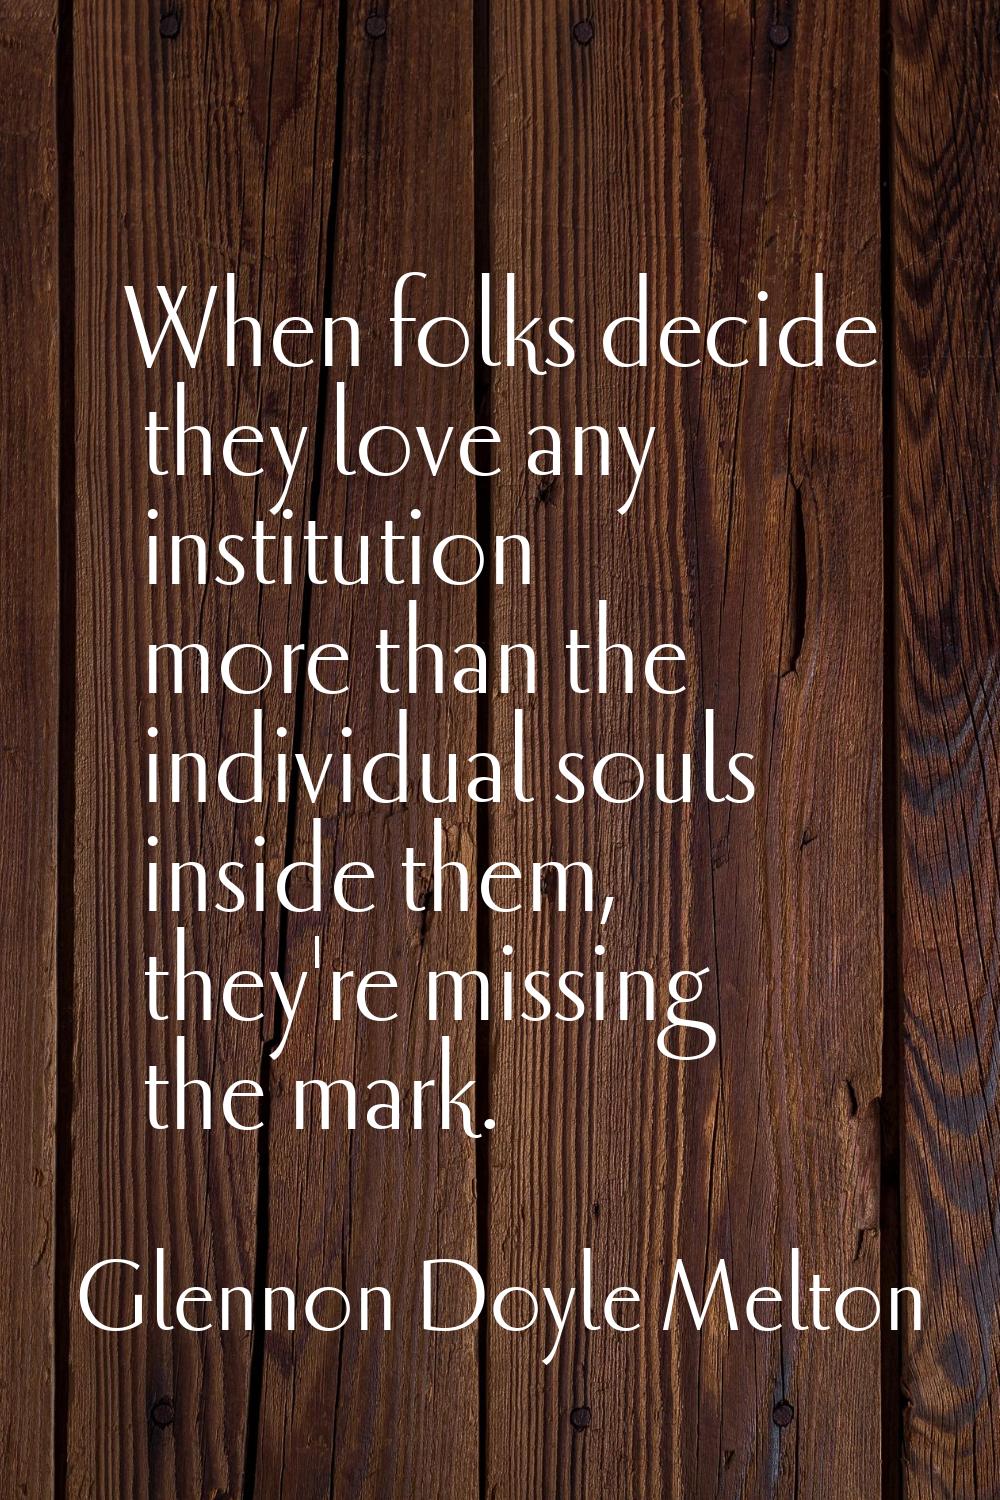 When folks decide they love any institution more than the individual souls inside them, they're mis